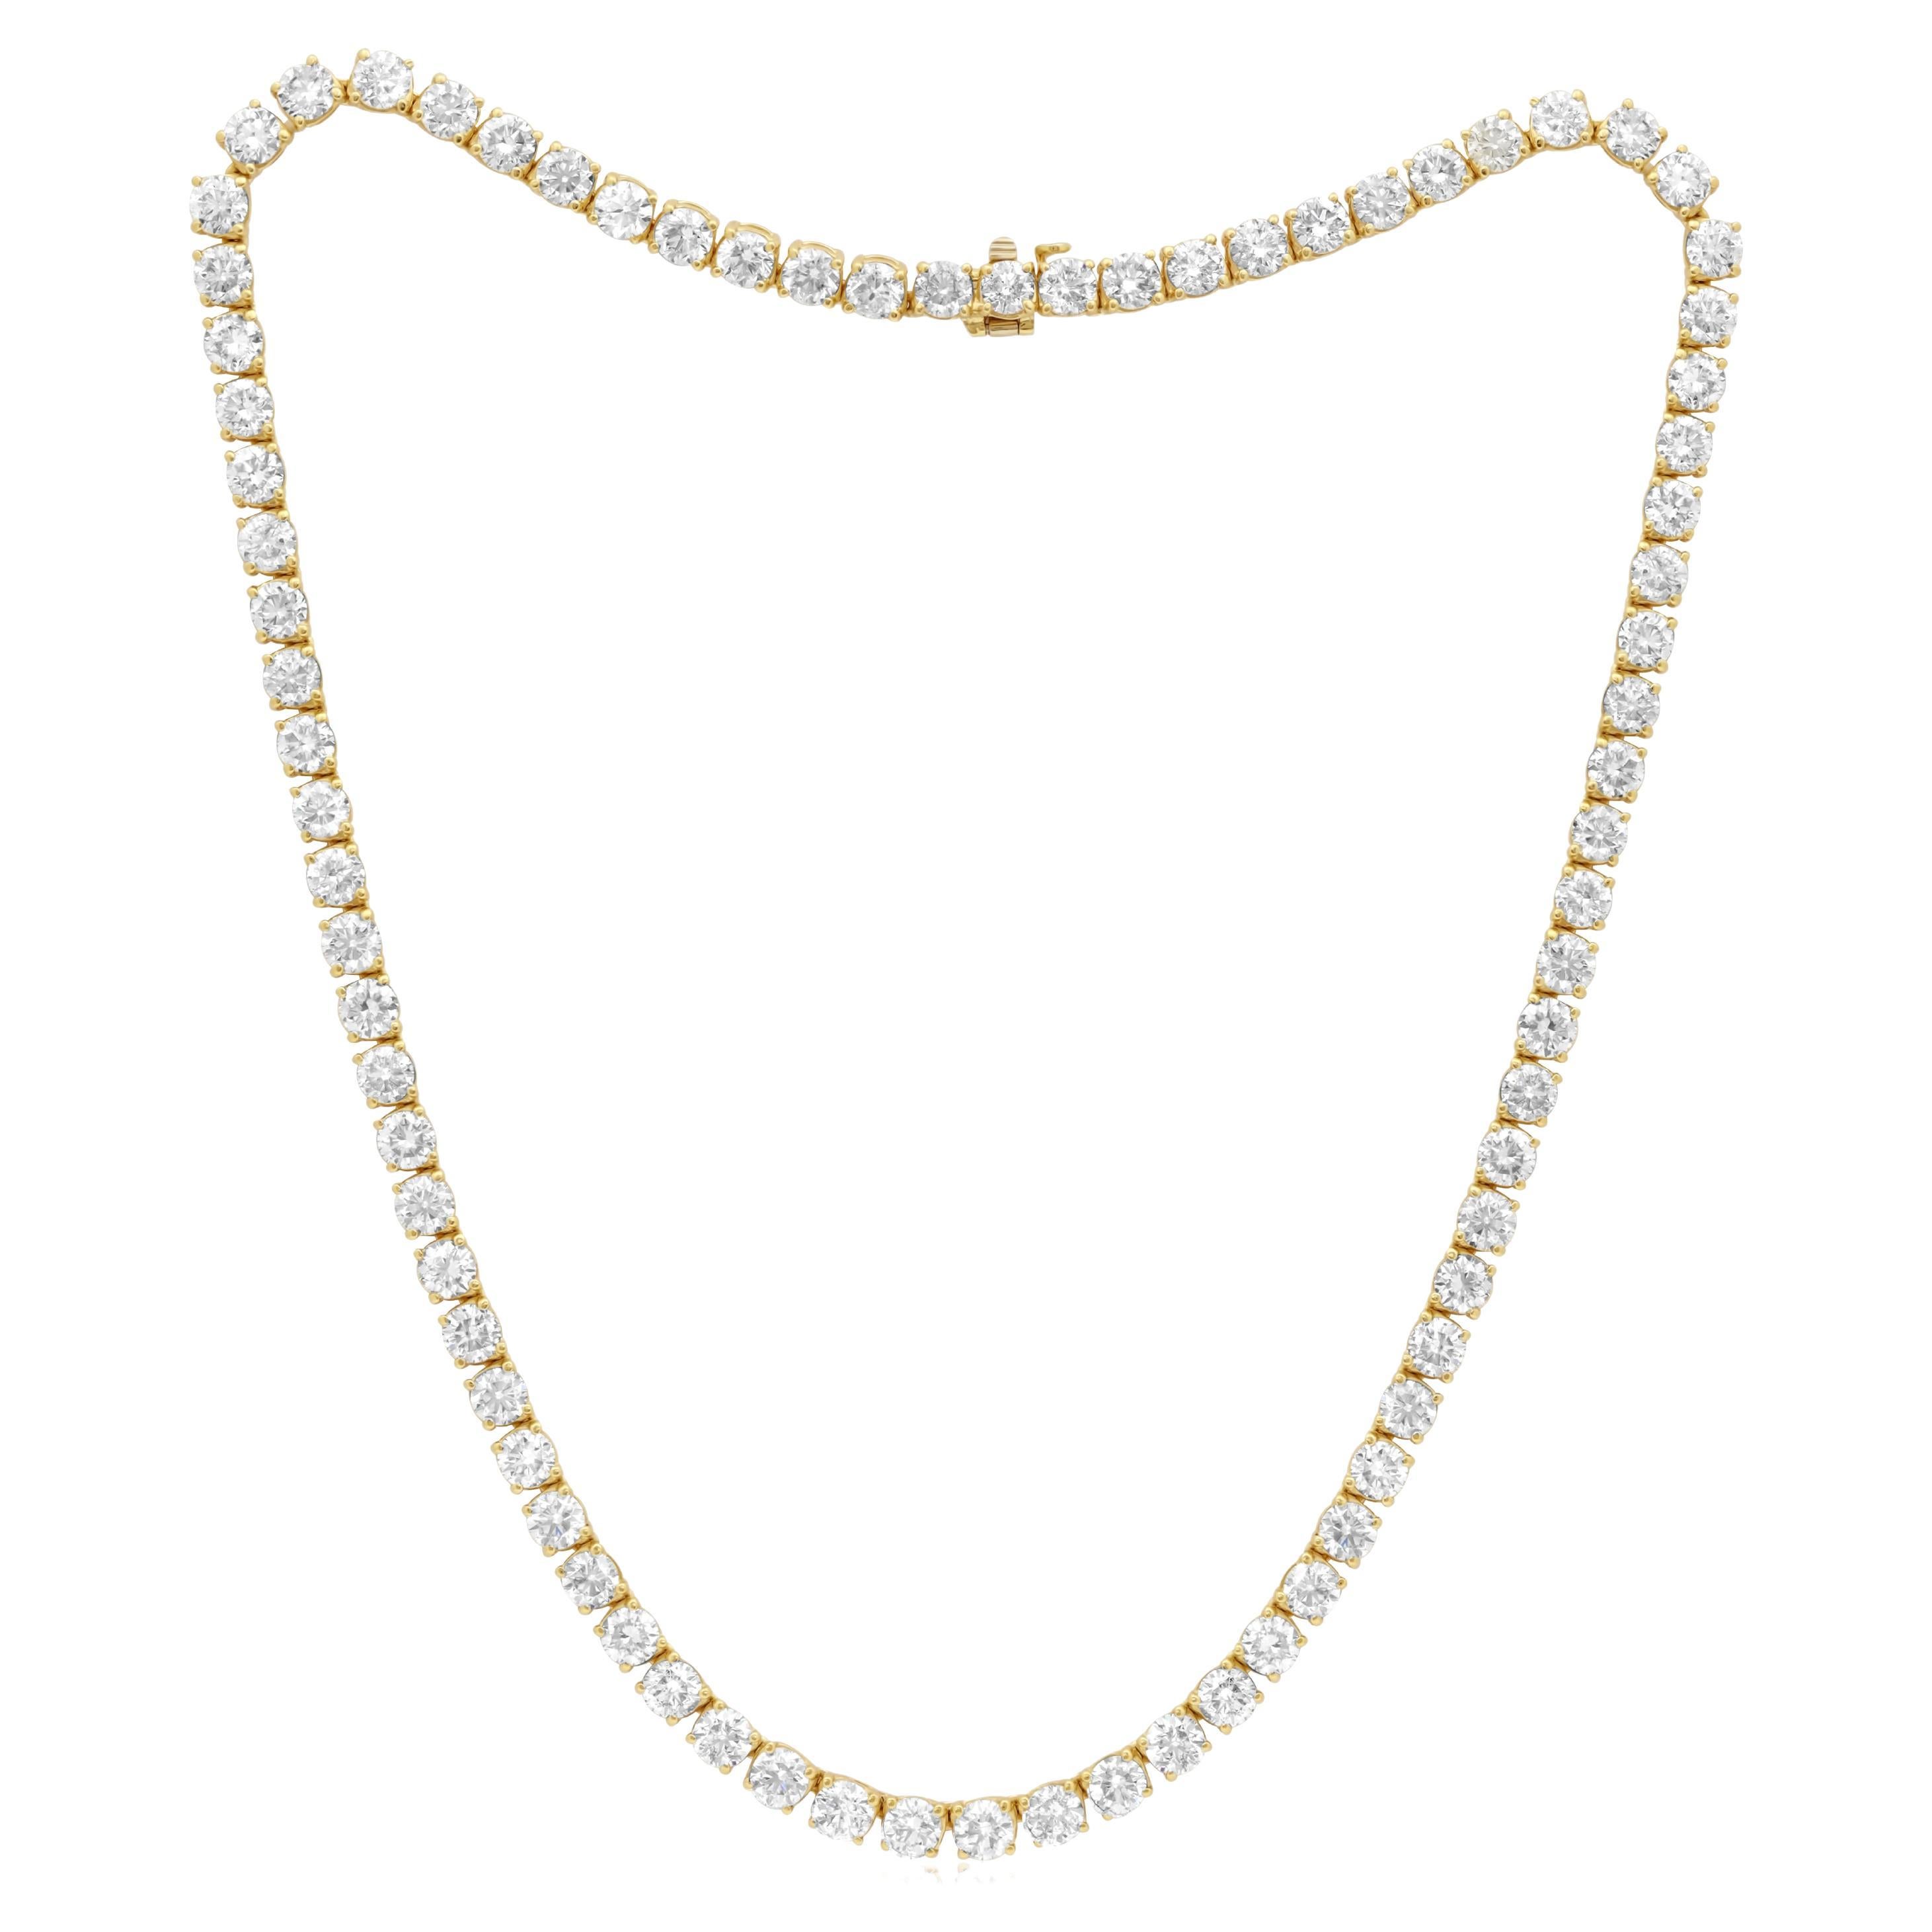 Diana M. Custom 25.00 cts Round 4 Prong Diamond 18K Yellow Gold Tennis Necklace  For Sale